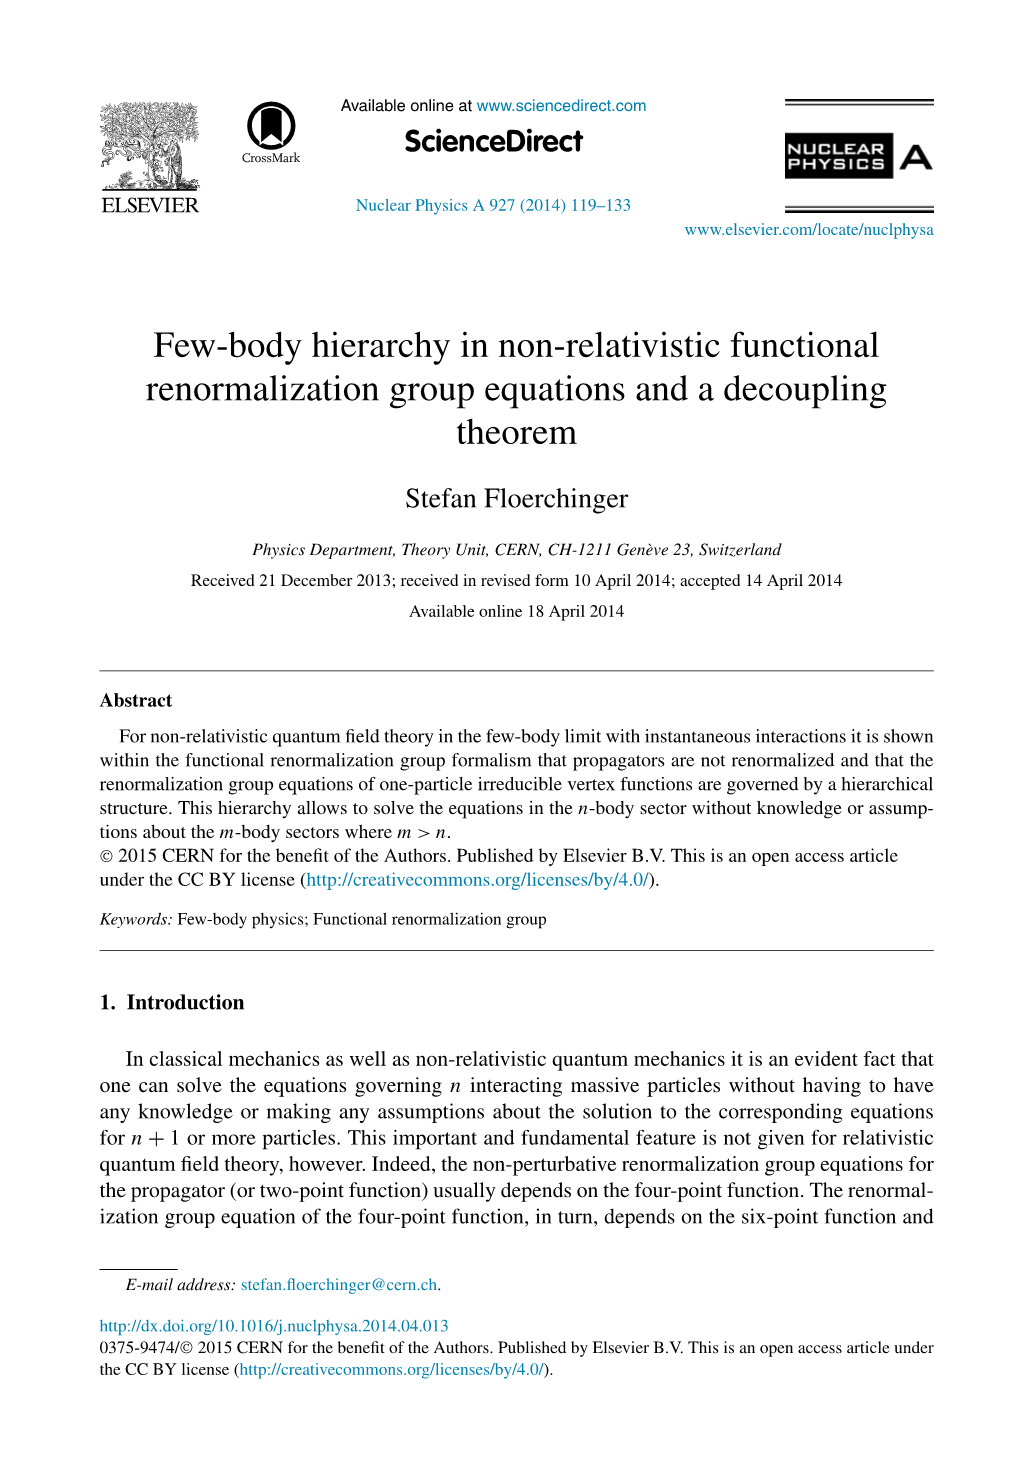 Few-Body Hierarchy in Non-Relativistic Functional Renormalization Group Equations and a Decoupling Theorem